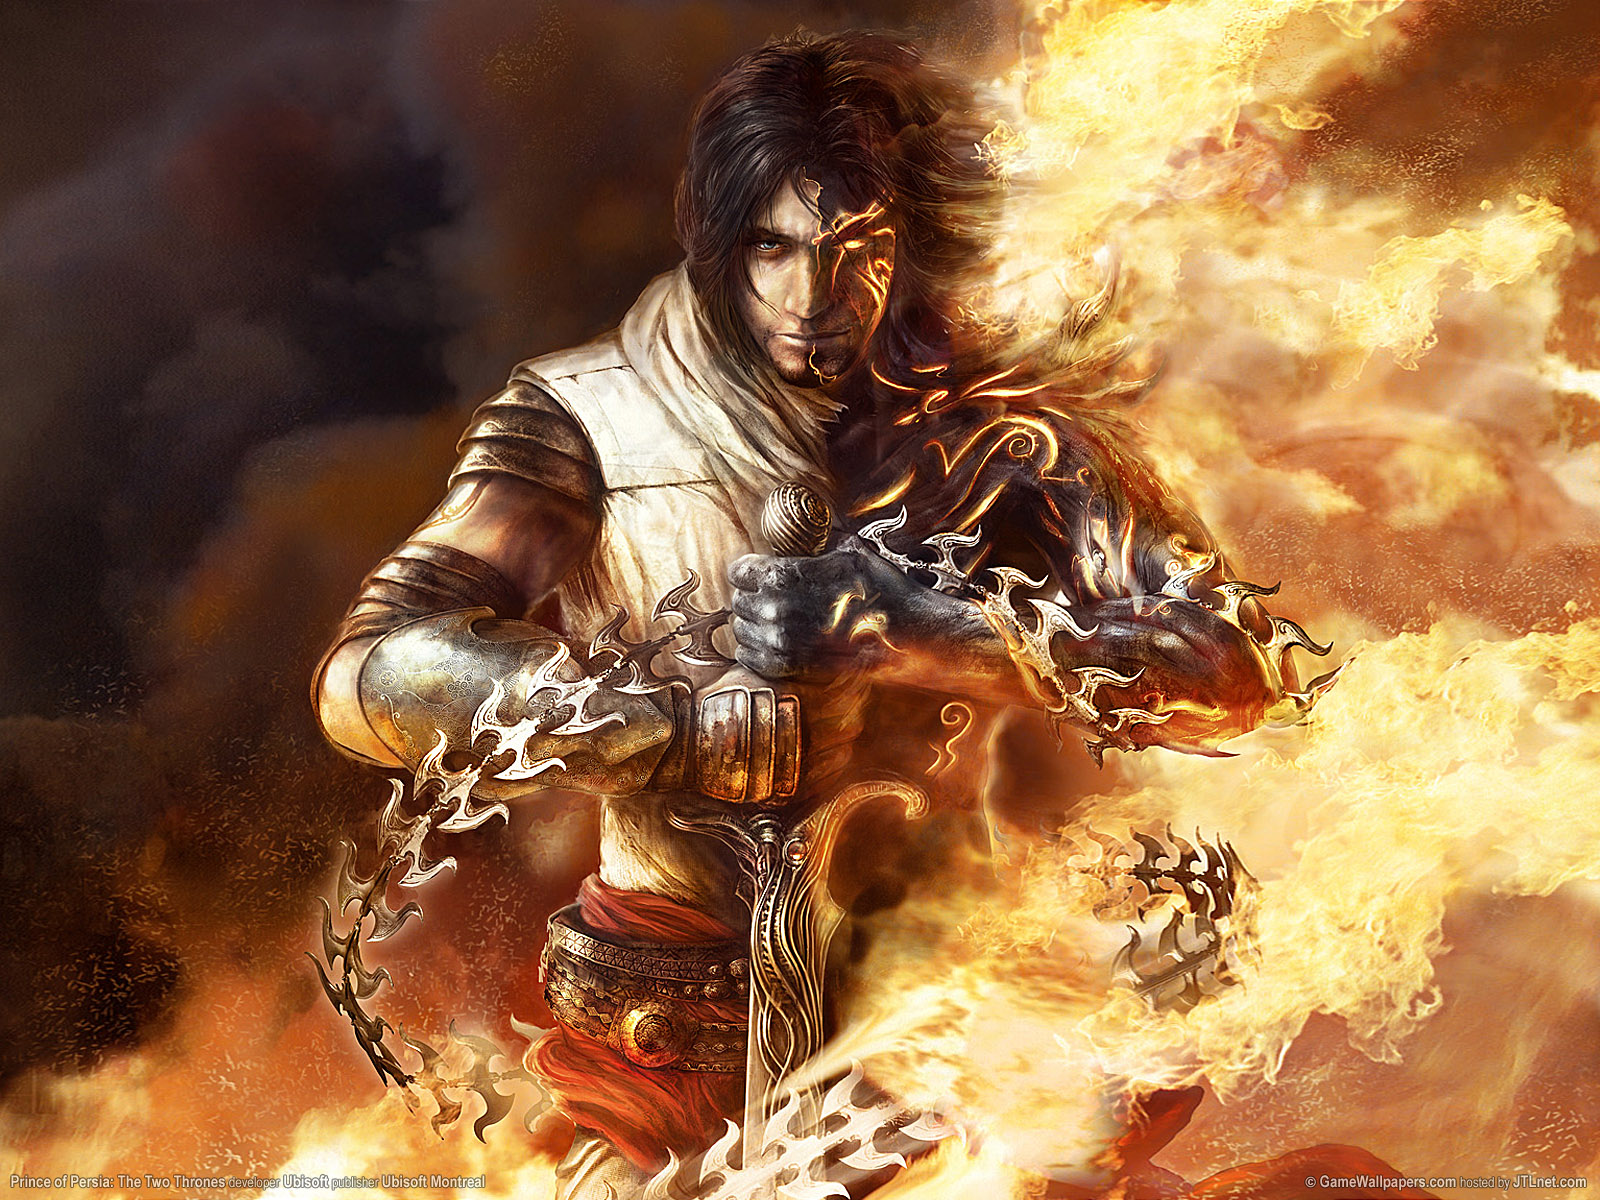 Download High quality Prince of Persia wallpaper / Games / 1600x1200